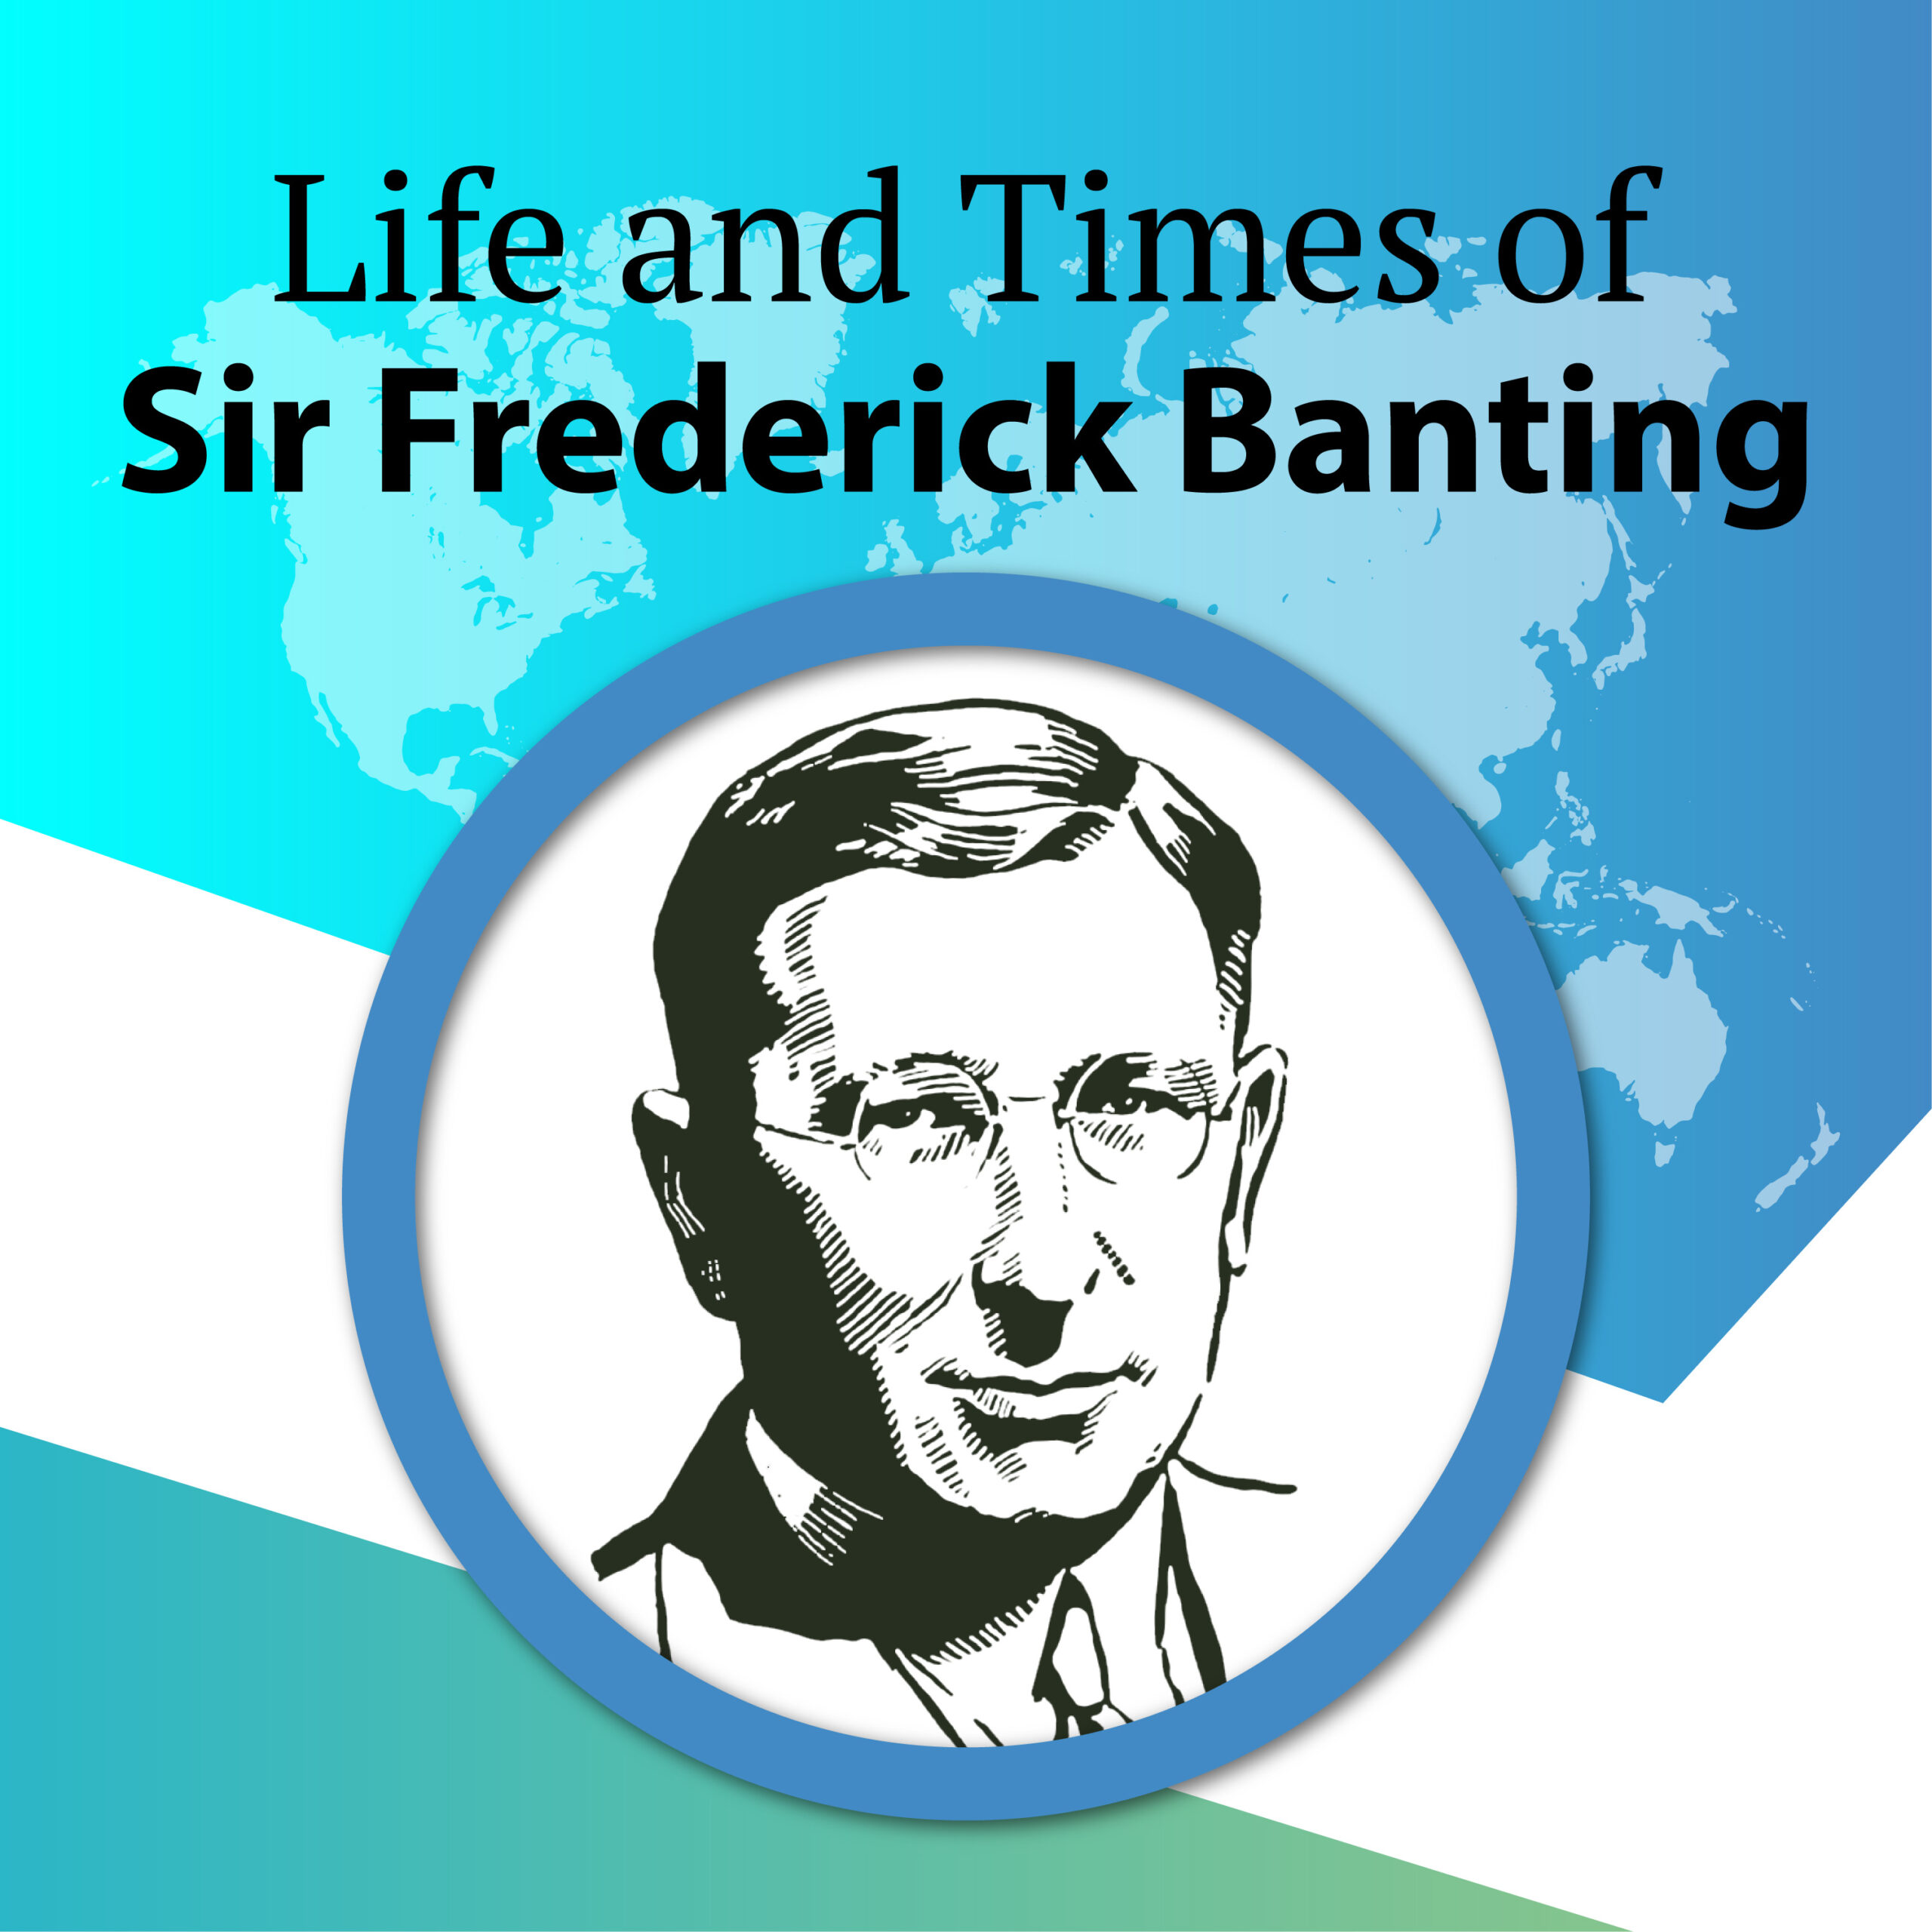 Life and Times of Sir Frederick Banting